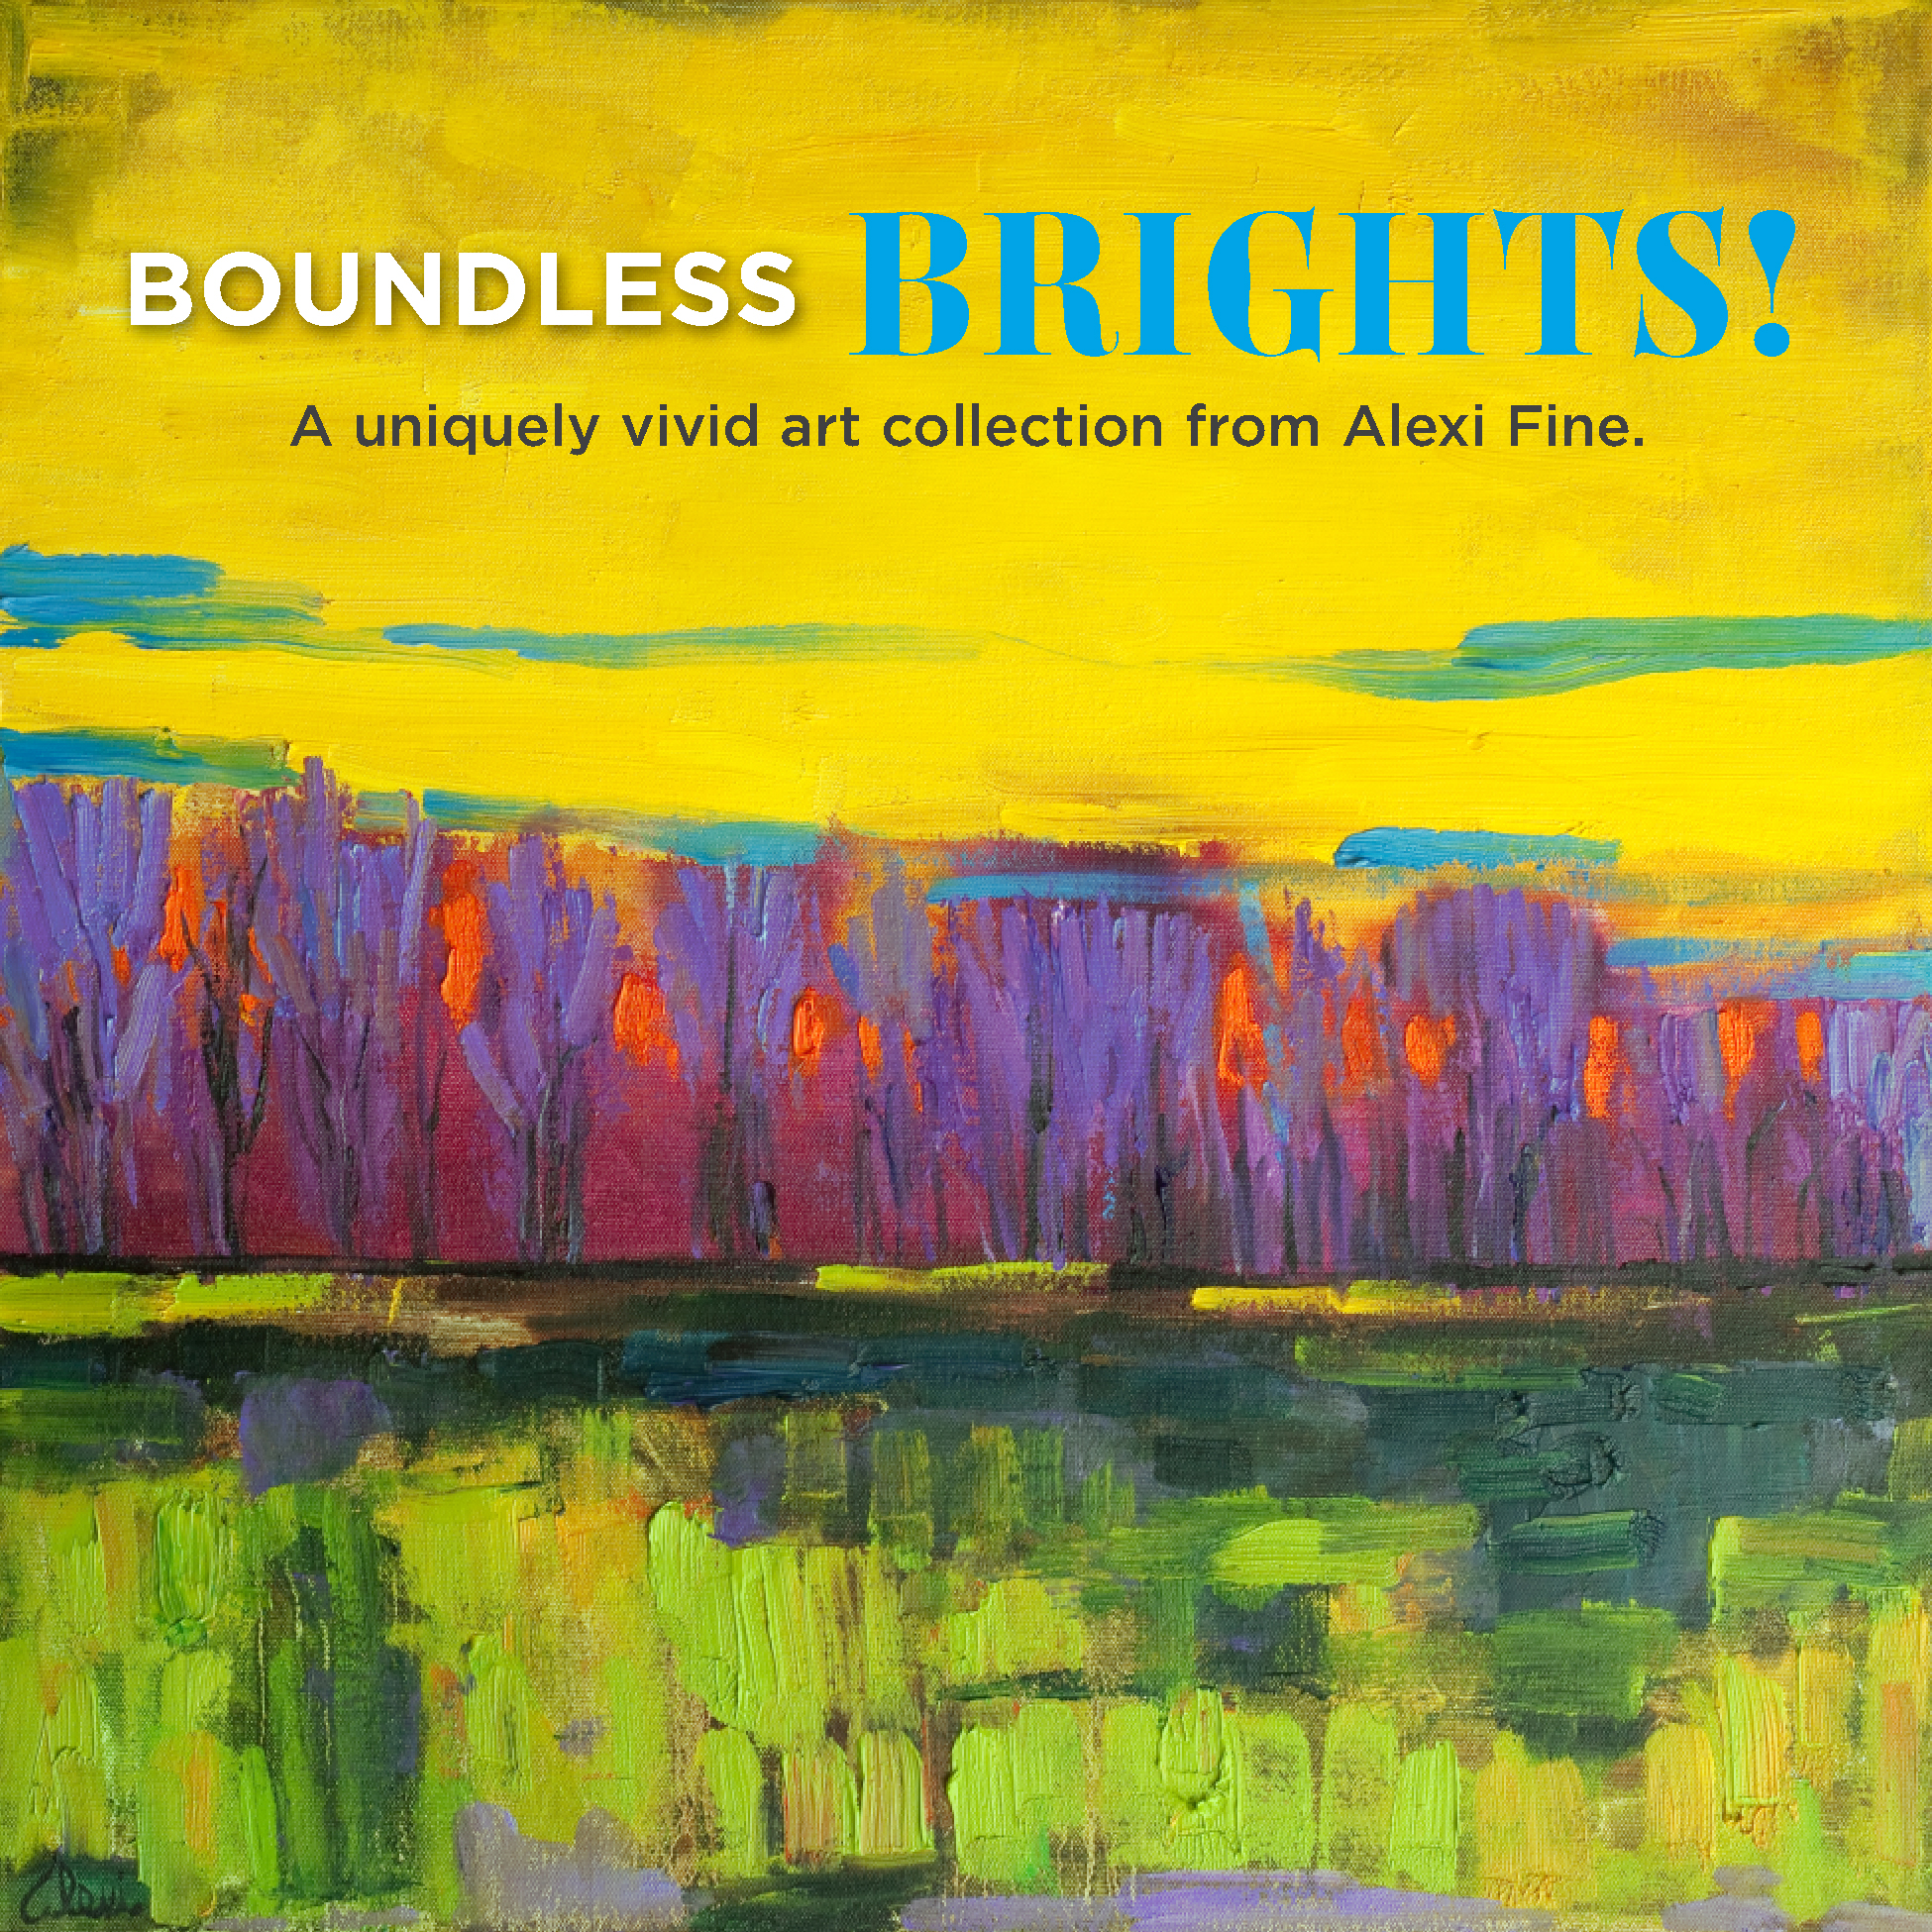 Boundless Brights!